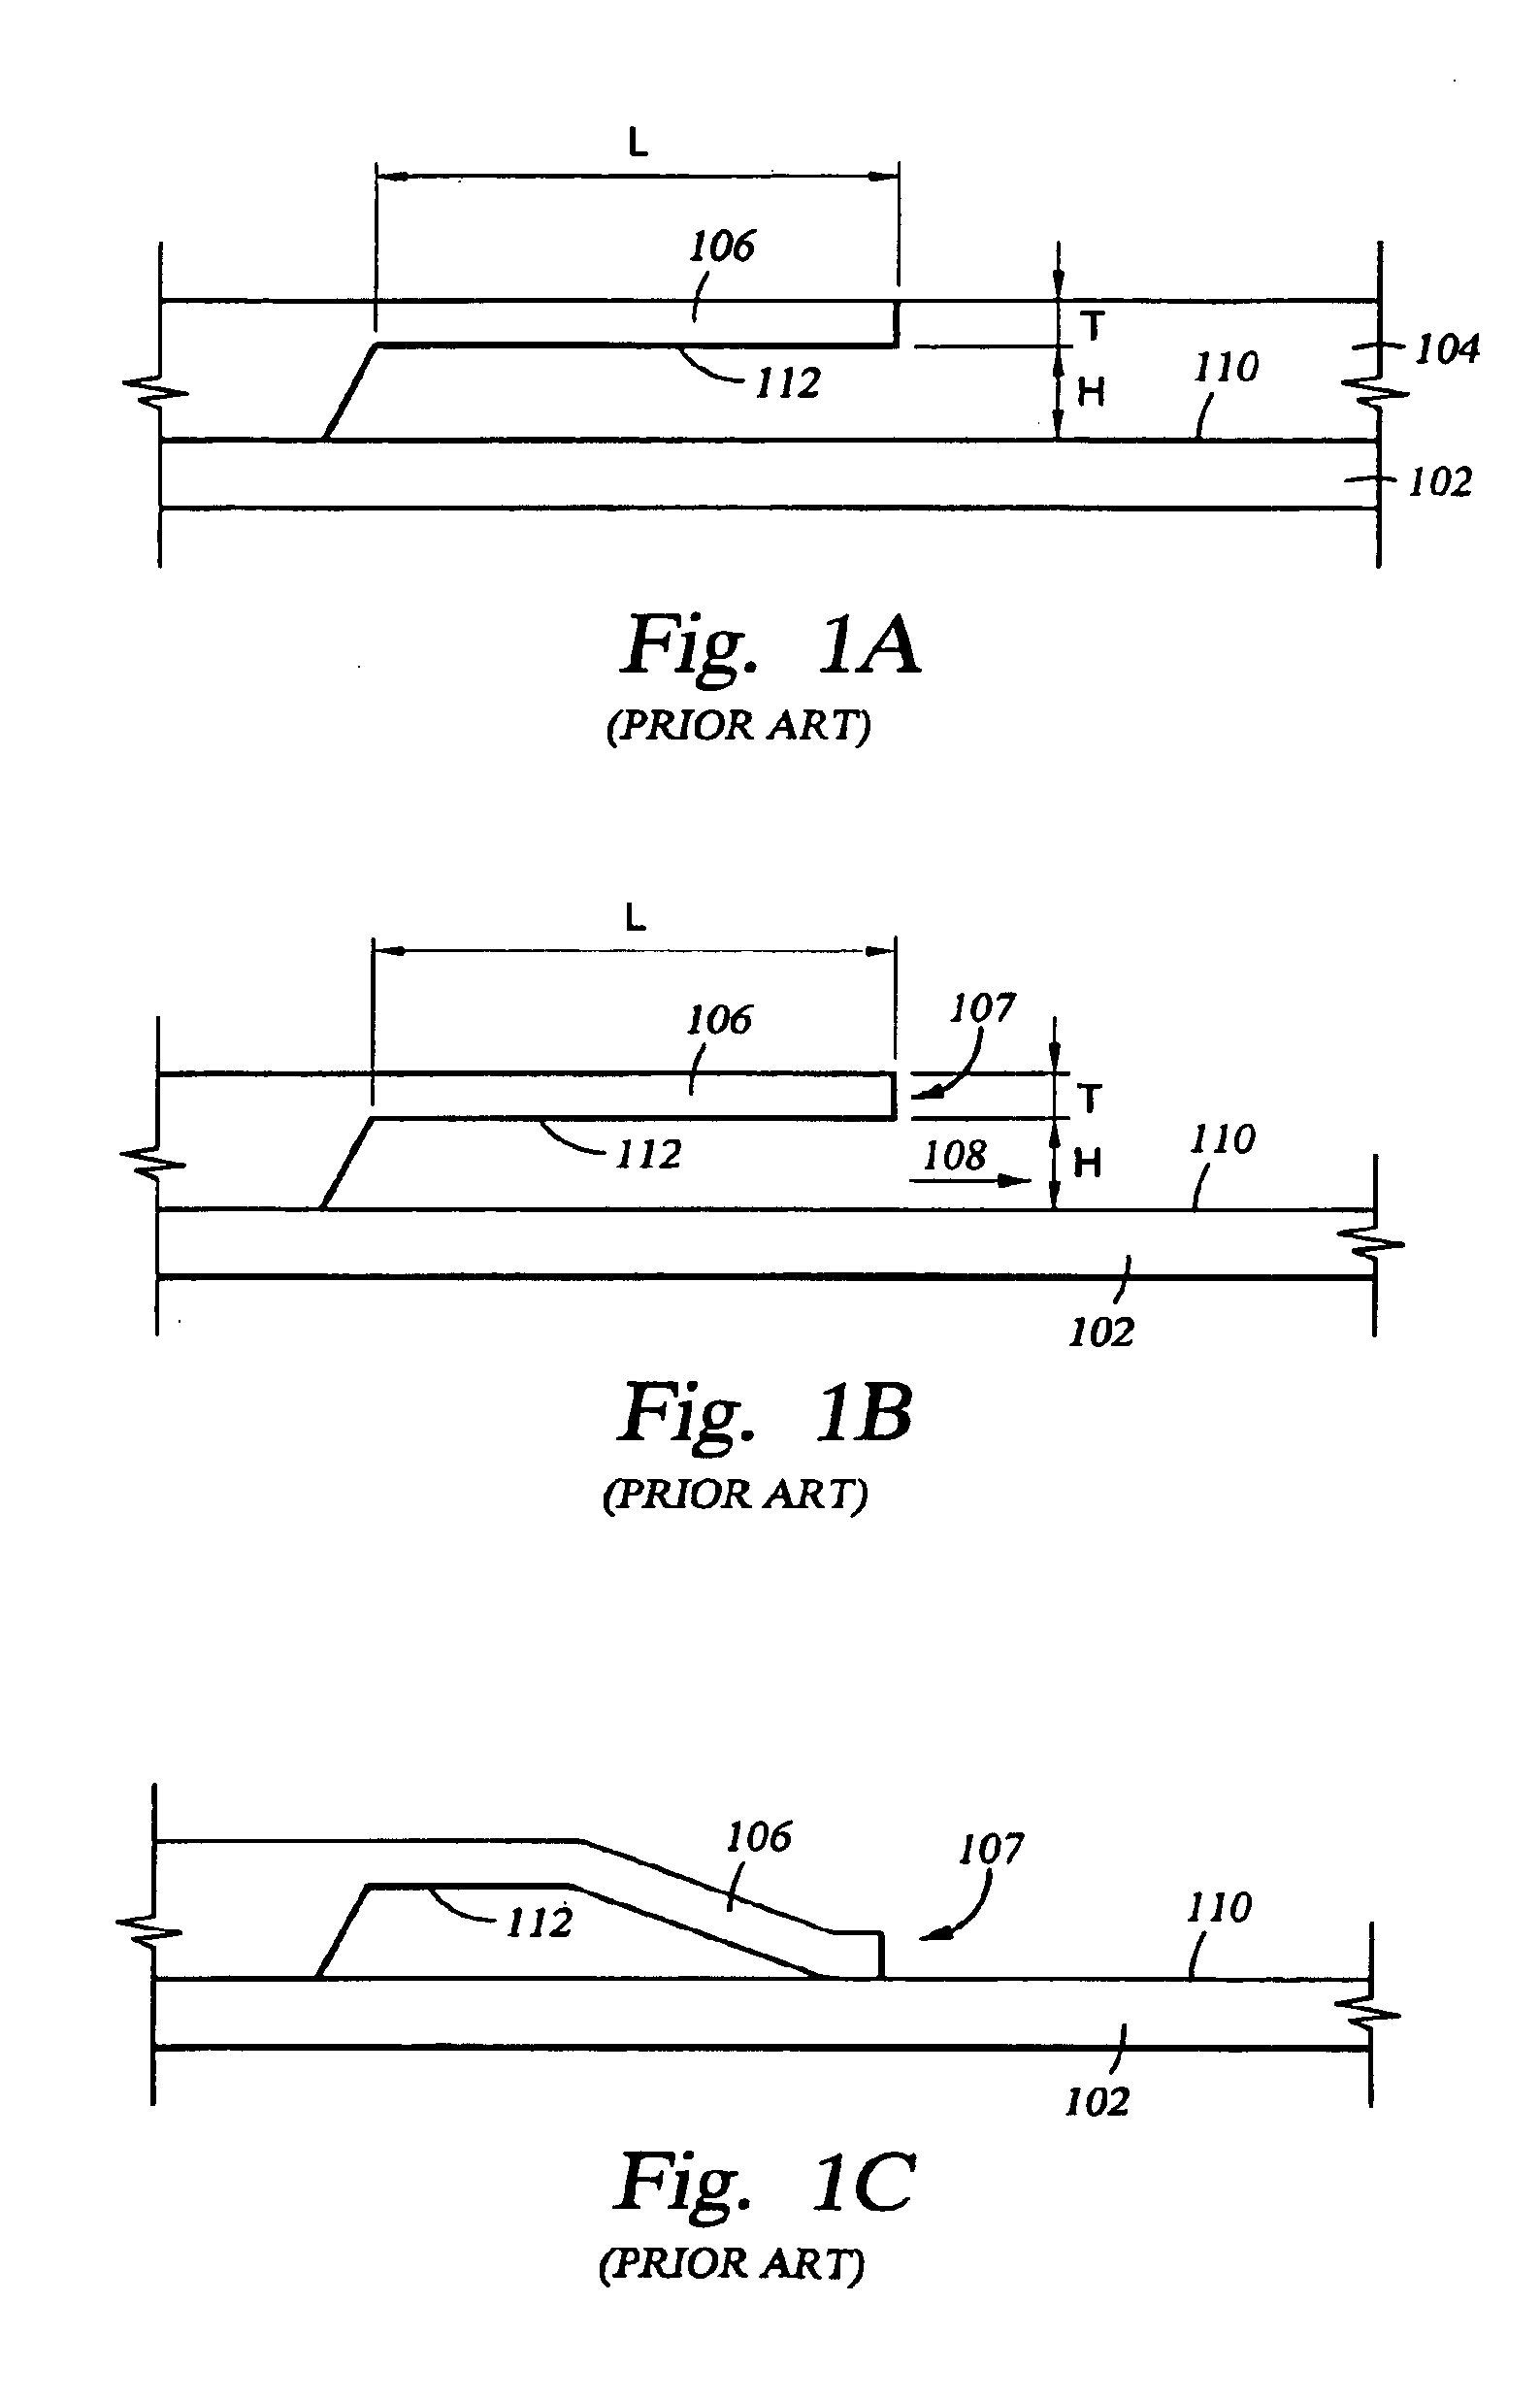 Integrated method for release and passivation of MEMS structures